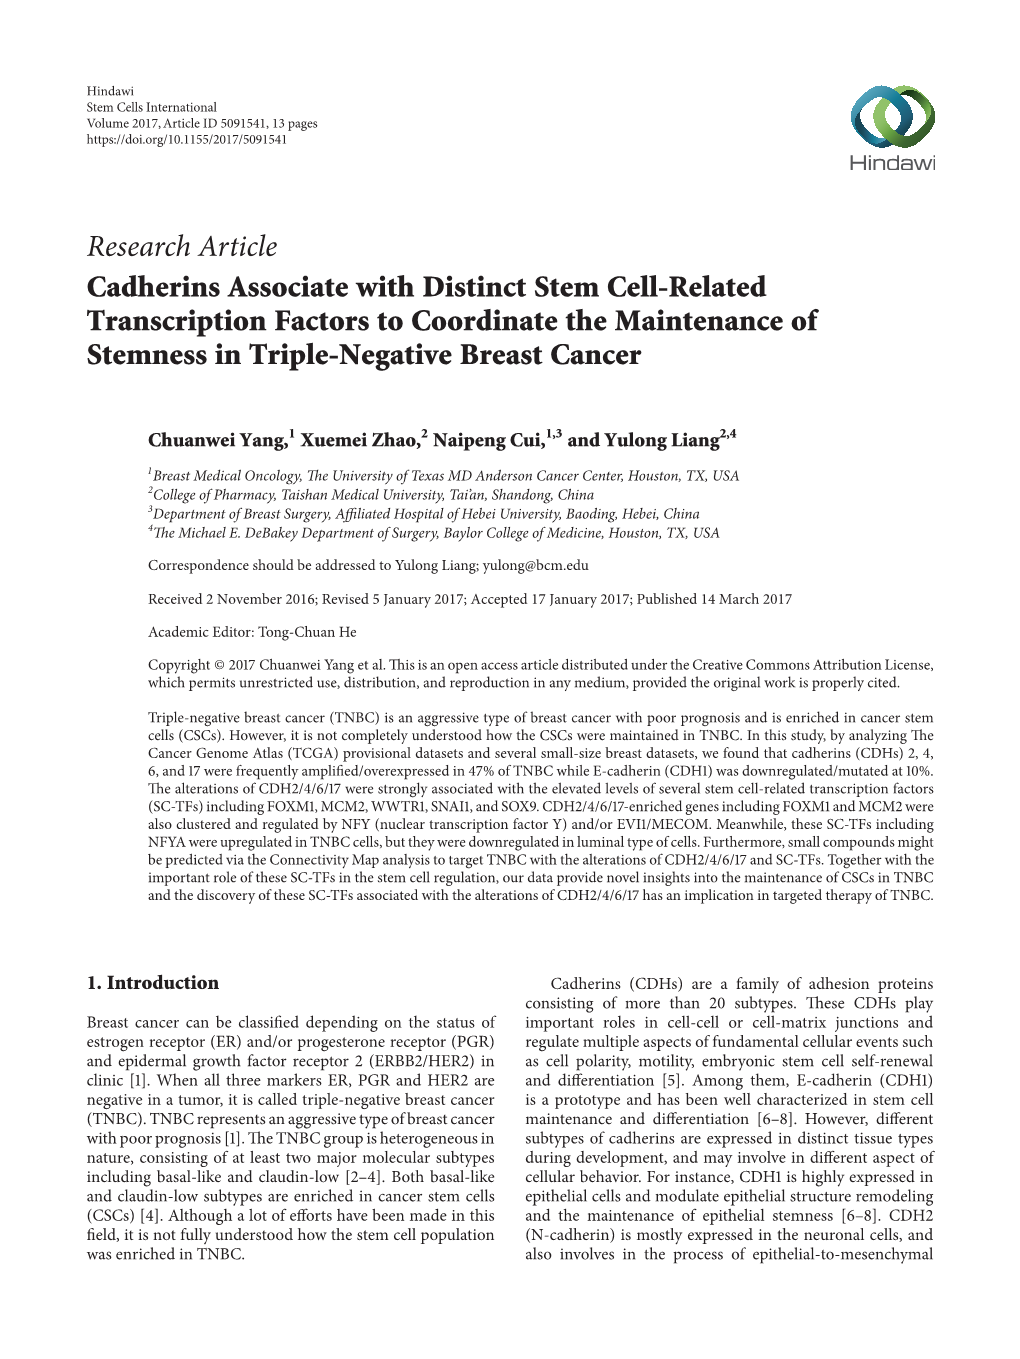 Cadherins Associate with Distinct Stem Cell-Related Transcription Factors to Coordinate the Maintenance of Stemness in Triple-Negative Breast Cancer